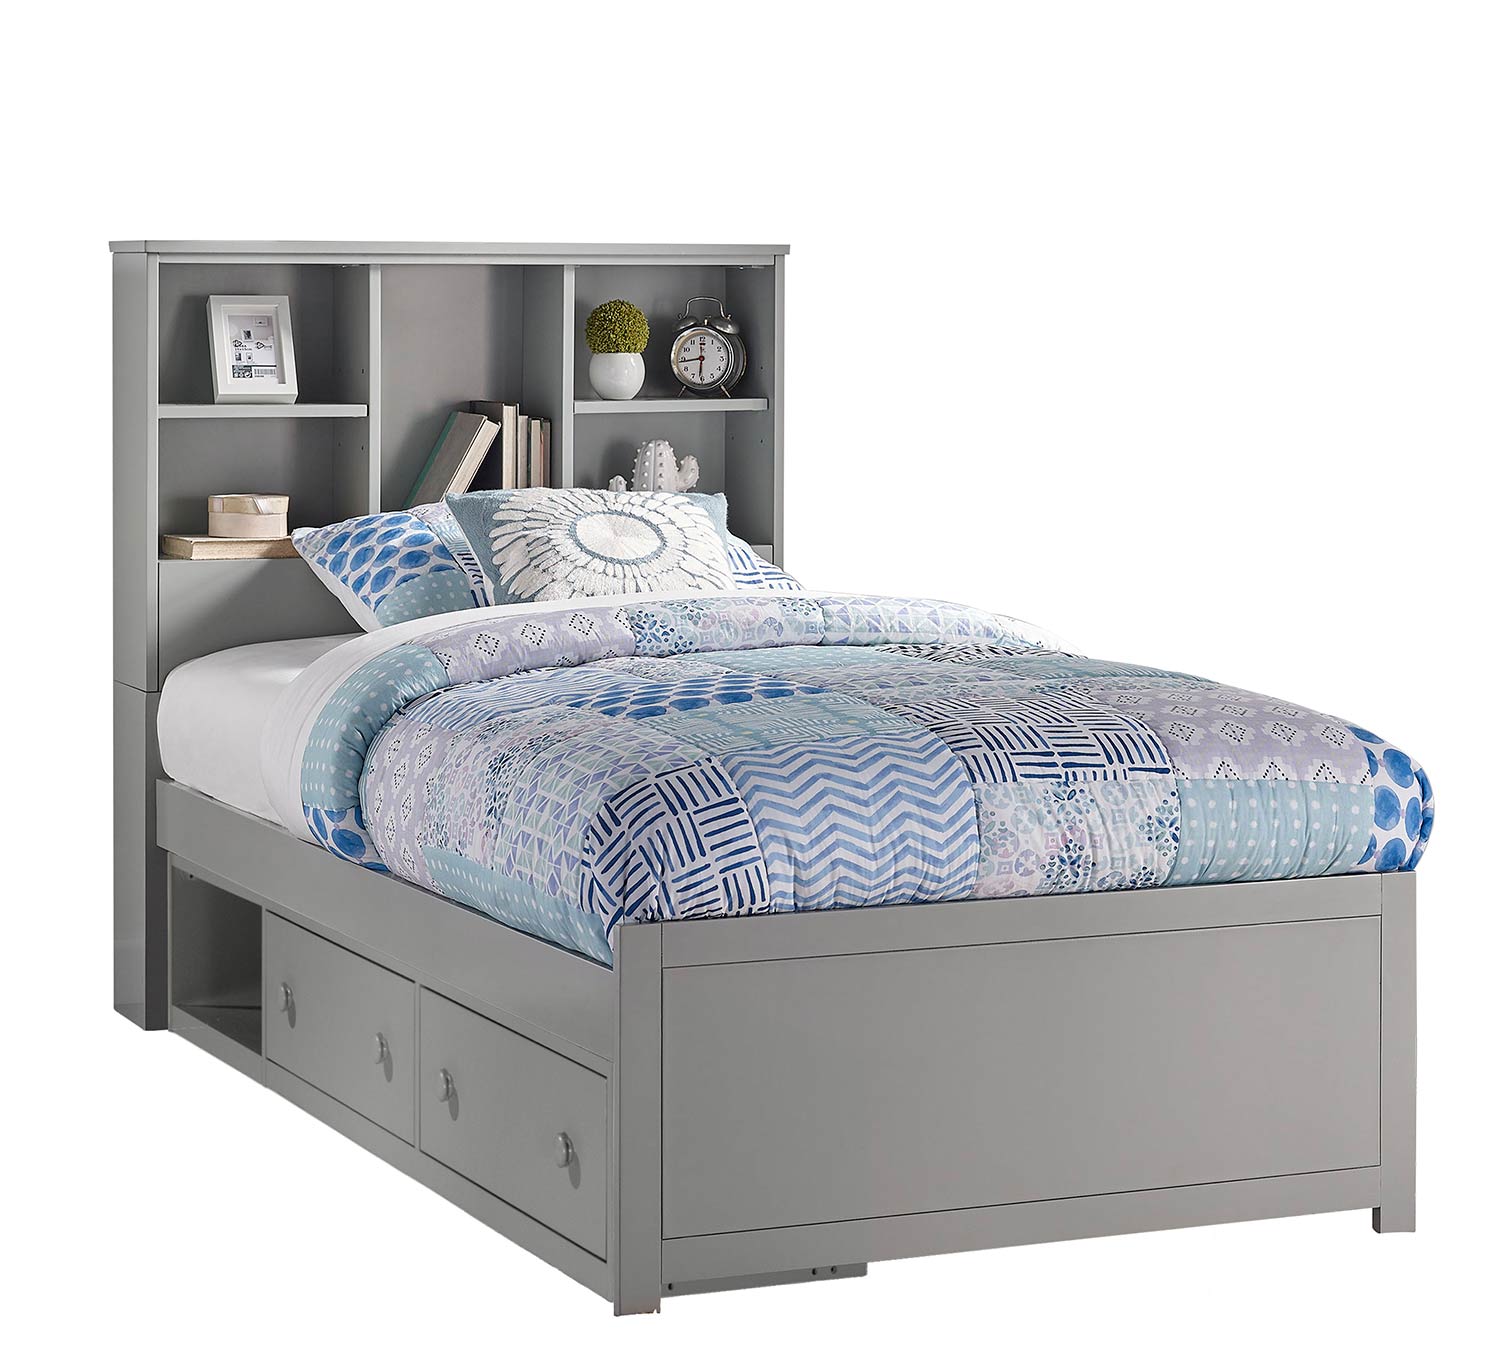 Hillsdale Caspian Twin Bookcase Bed with Storage Unit - Gray